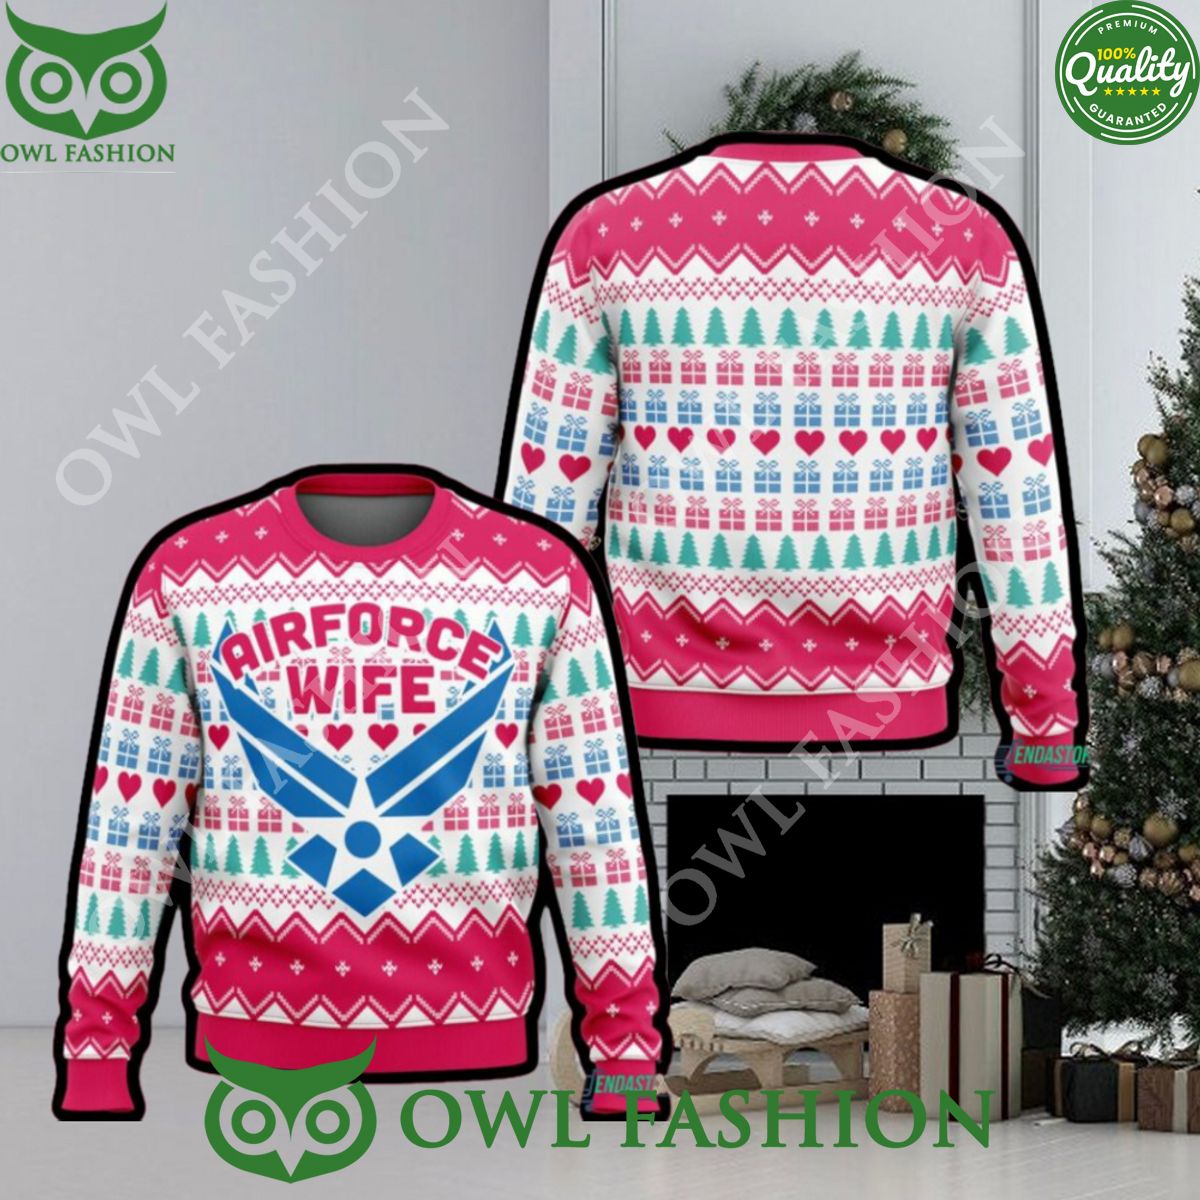 Air Force Wife Christmas Ugly Sweater Hey! Your profile picture is awesome